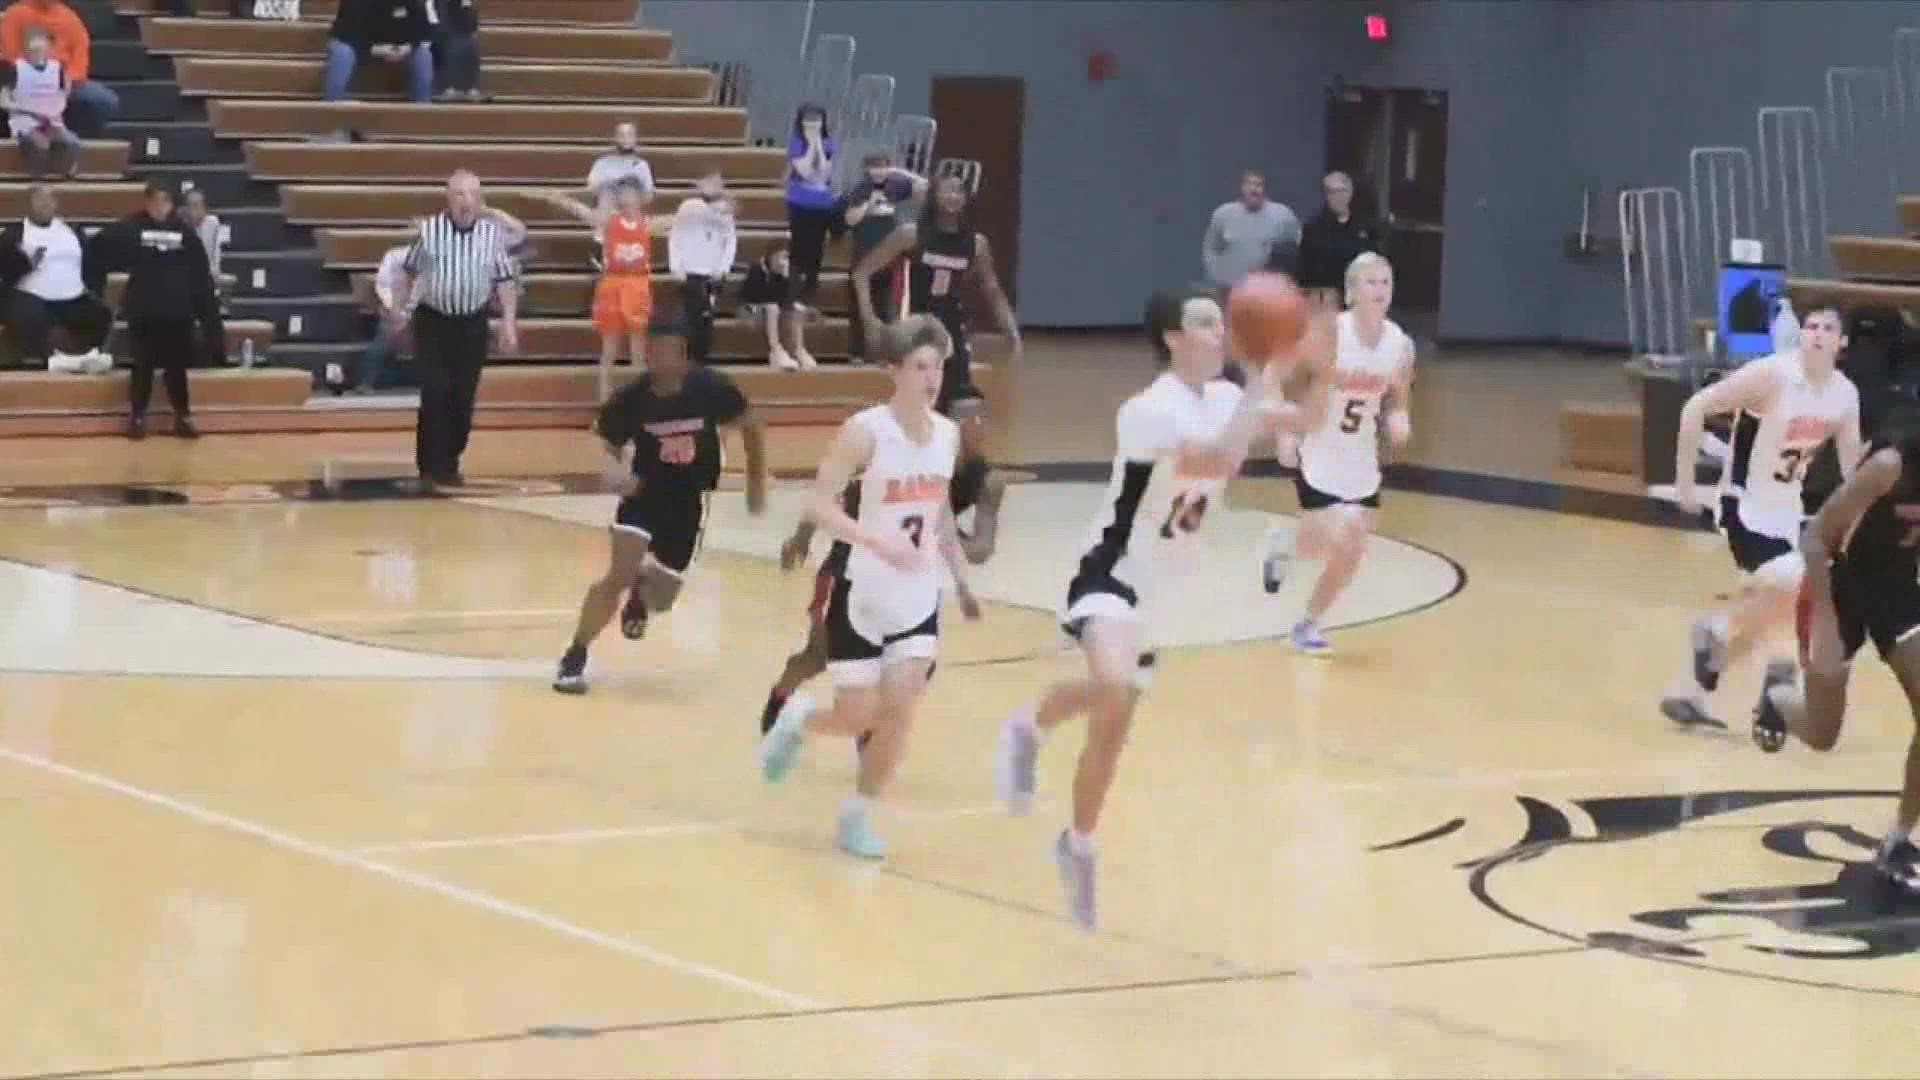 Rockford was tied with Union High 51-51 until Andrew Landis took his shot from half court to win the game at the buzzer.